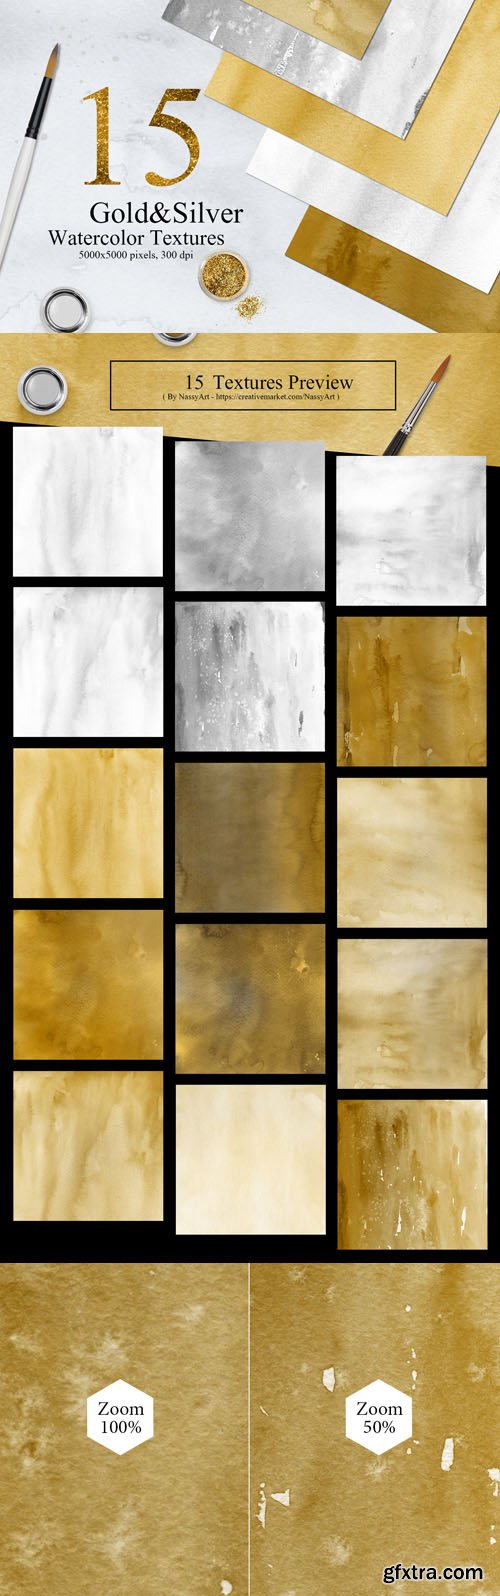 15 Gold & Silver Colors Watercolor Textures Collection